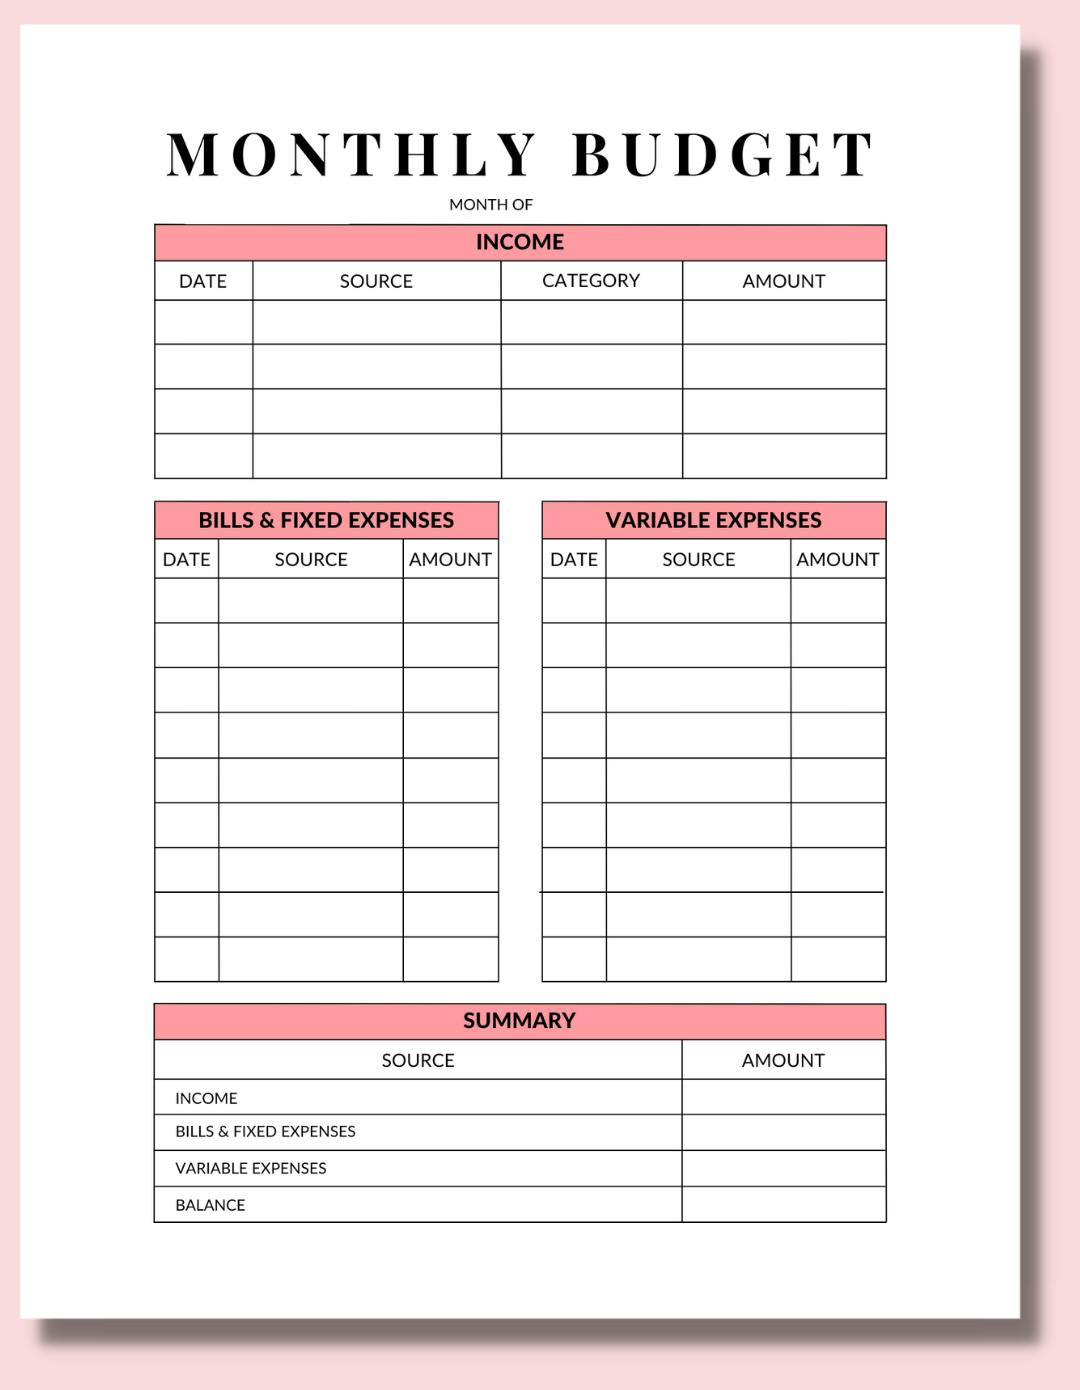 Free Budget worksheets: Take Control of Your Finances with Our